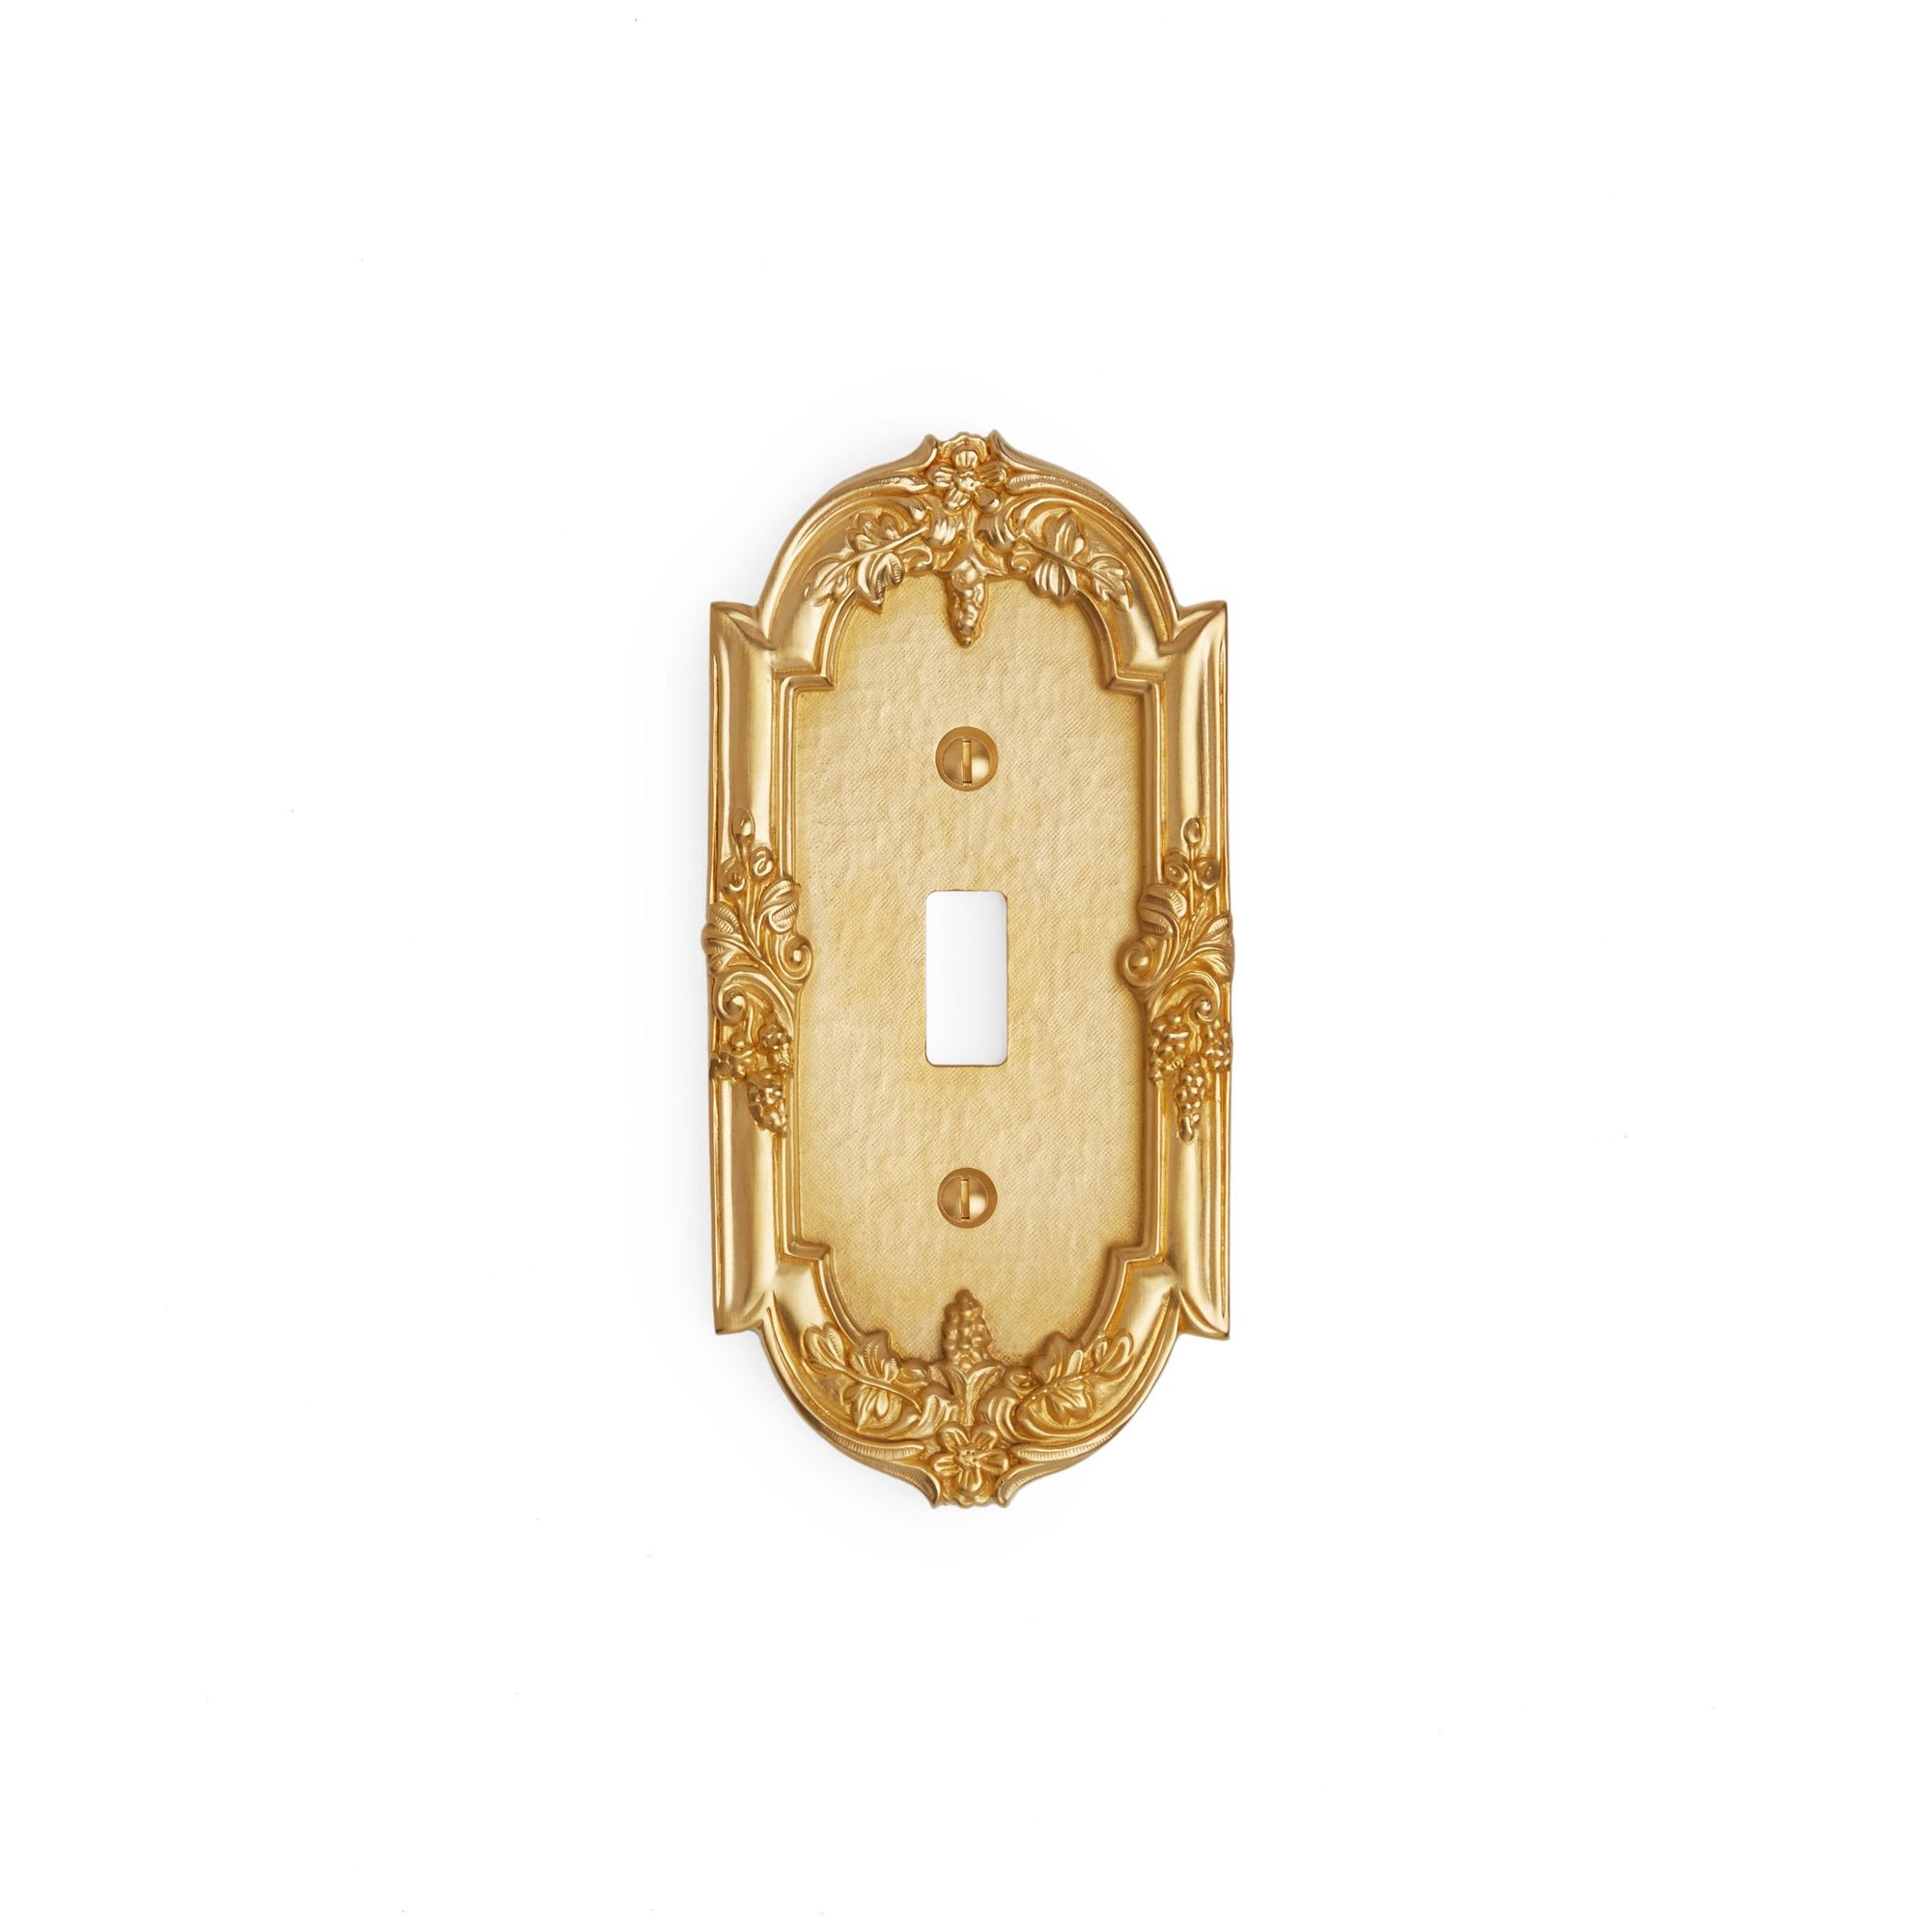 0458-SWT-GP Sherle Wagner International Grapes Single Switch Plate in Gold Plate metal finish